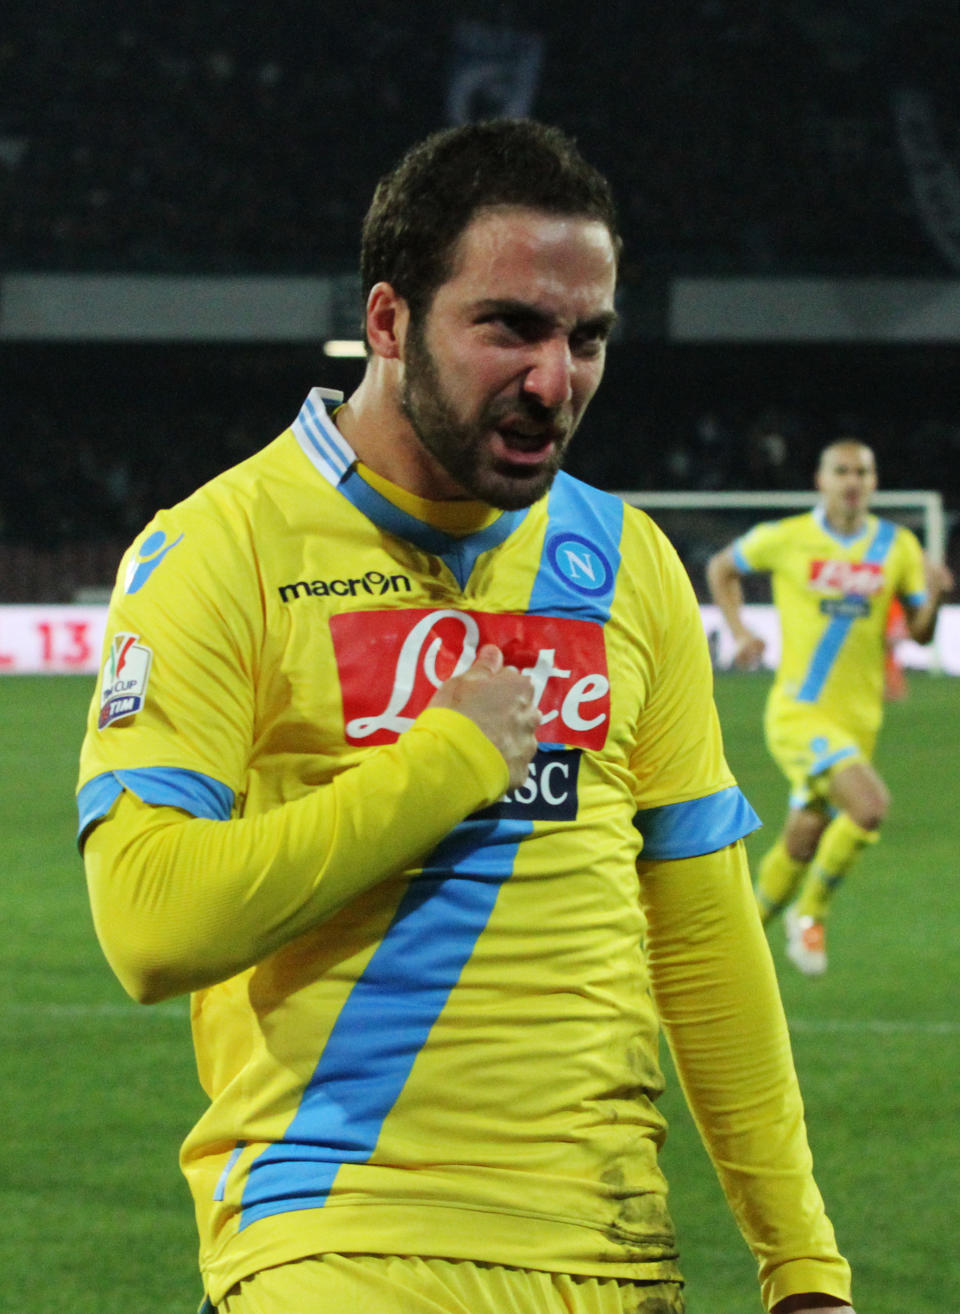 Napoli's Gonzalo Higuain celebrates after scoring during an Italian Cup, semifinal return match, between AS Roma and Napoli, at the San Paolo stadium in Naples, Italy, Wednesday, Feb. 12, 2014. (AP Photo/Salvatore Laporta)